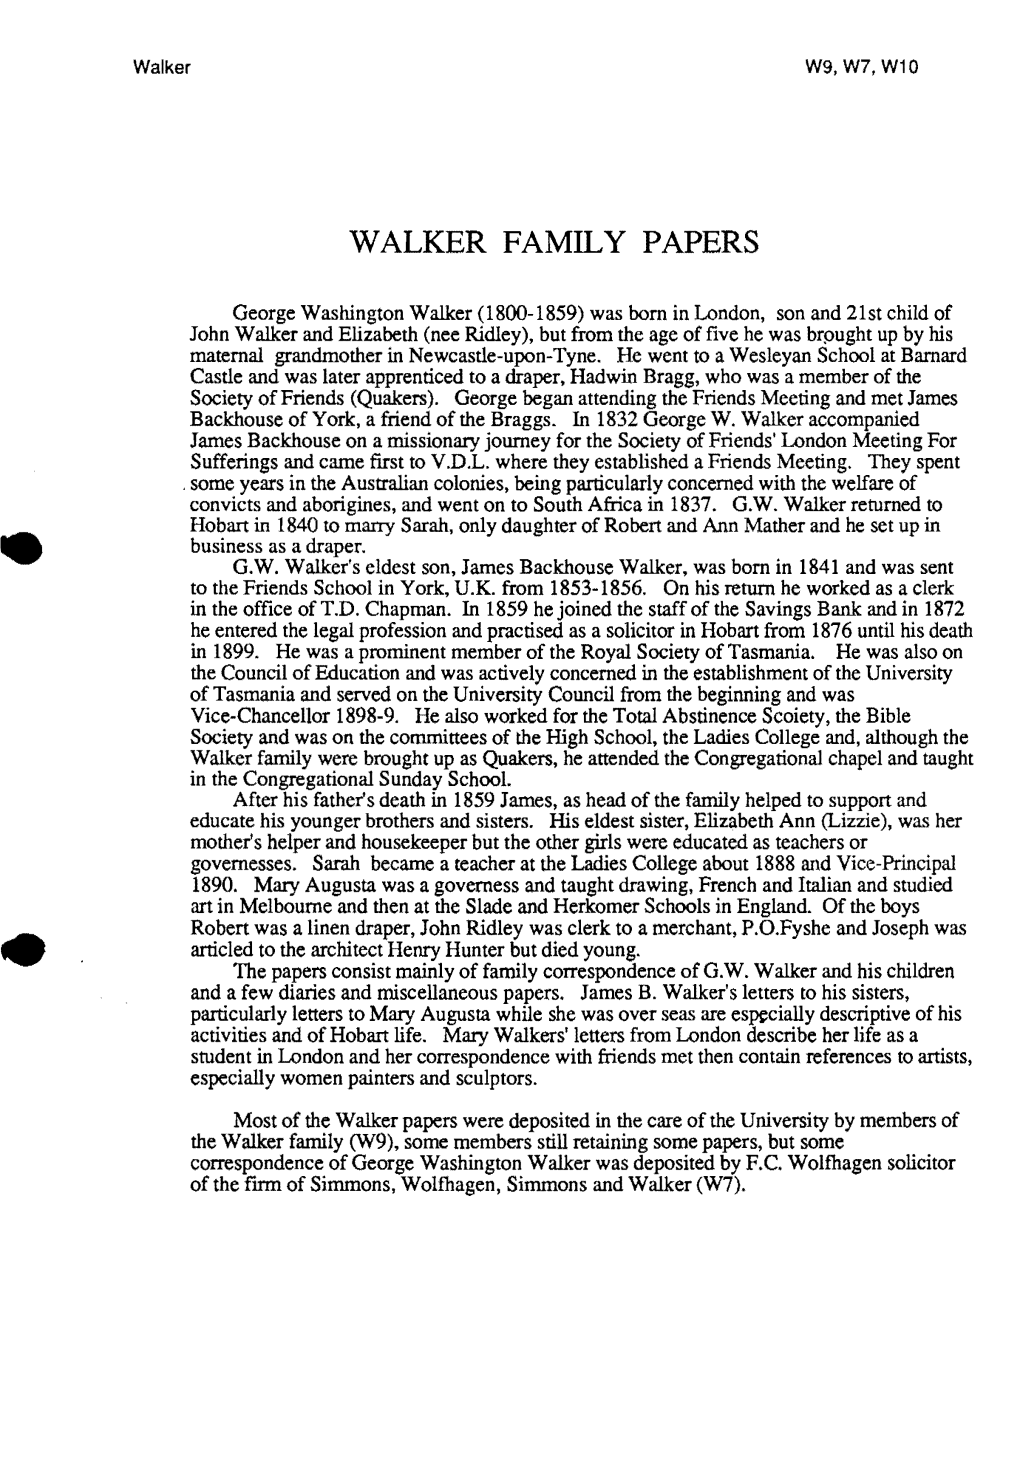 Walker Family Papers